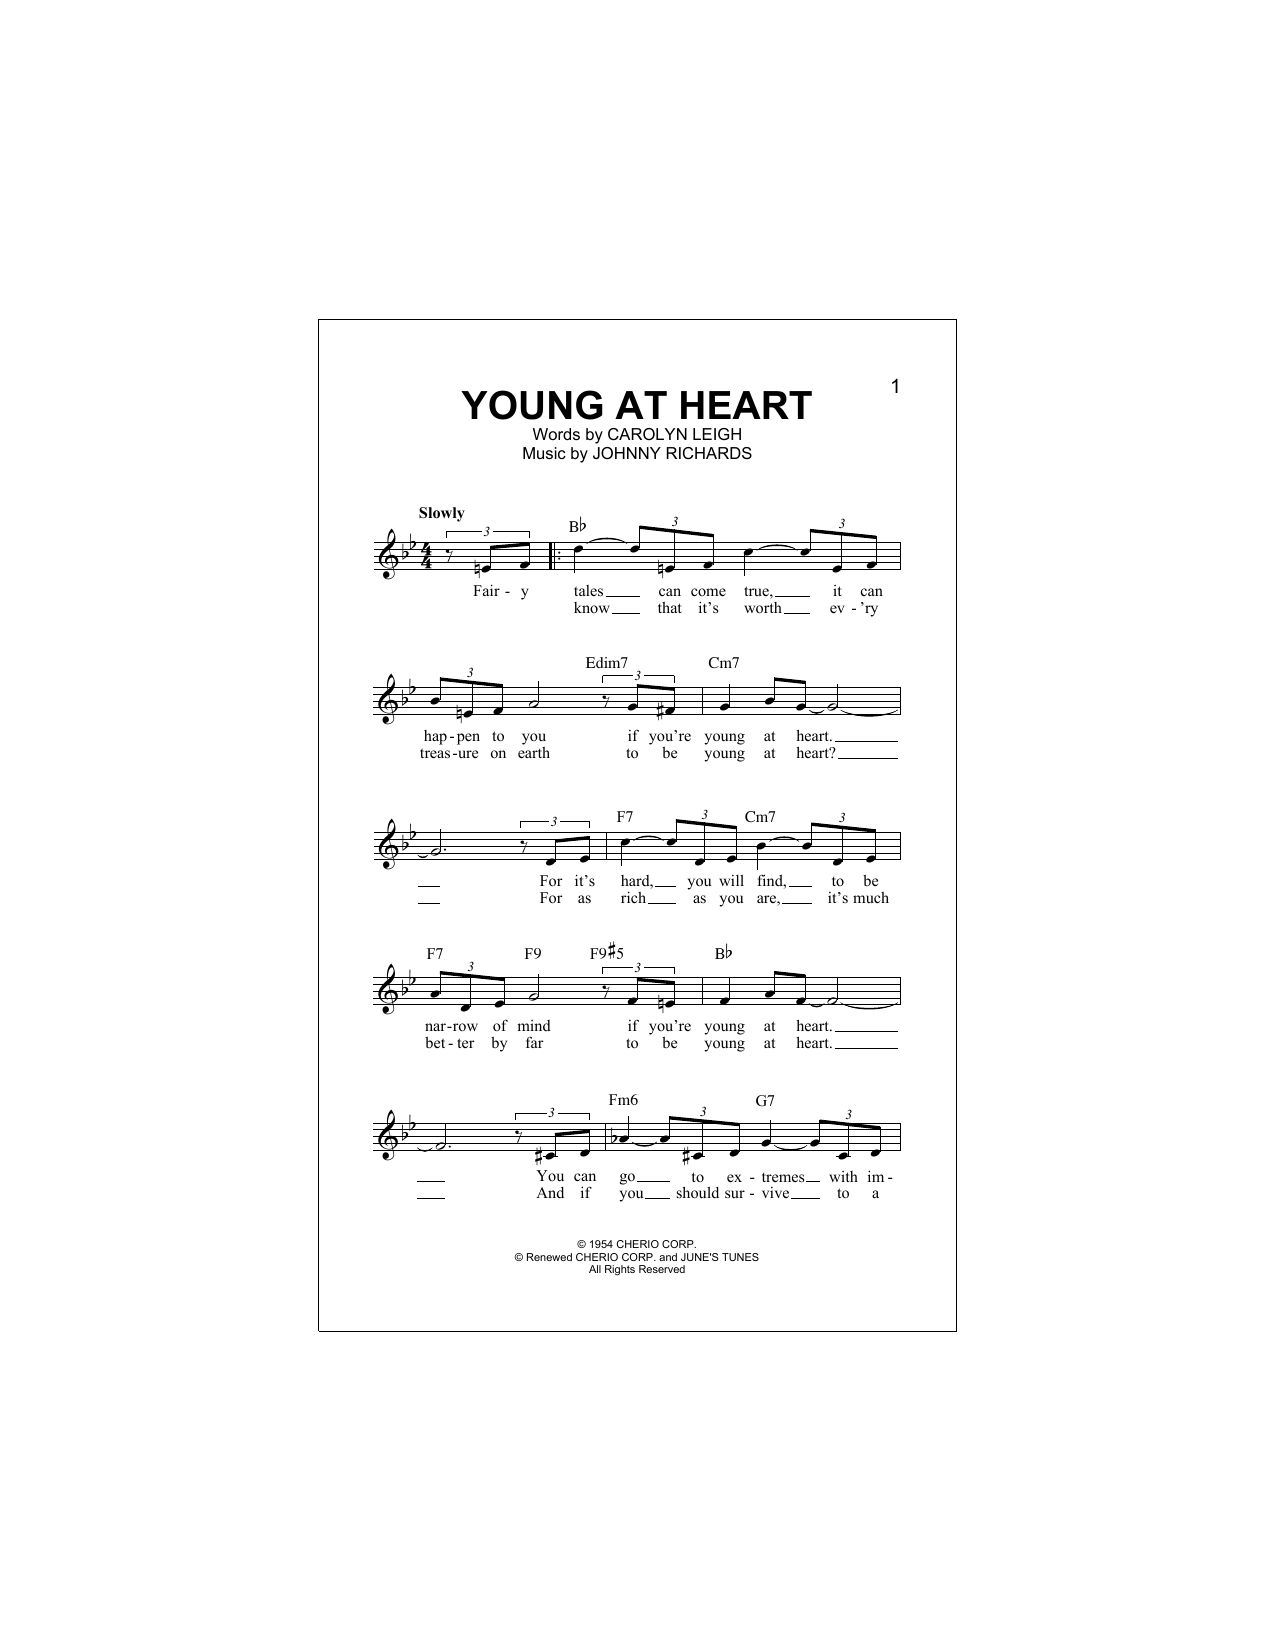 Download Carolyn Leigh Young At Heart Sheet Music